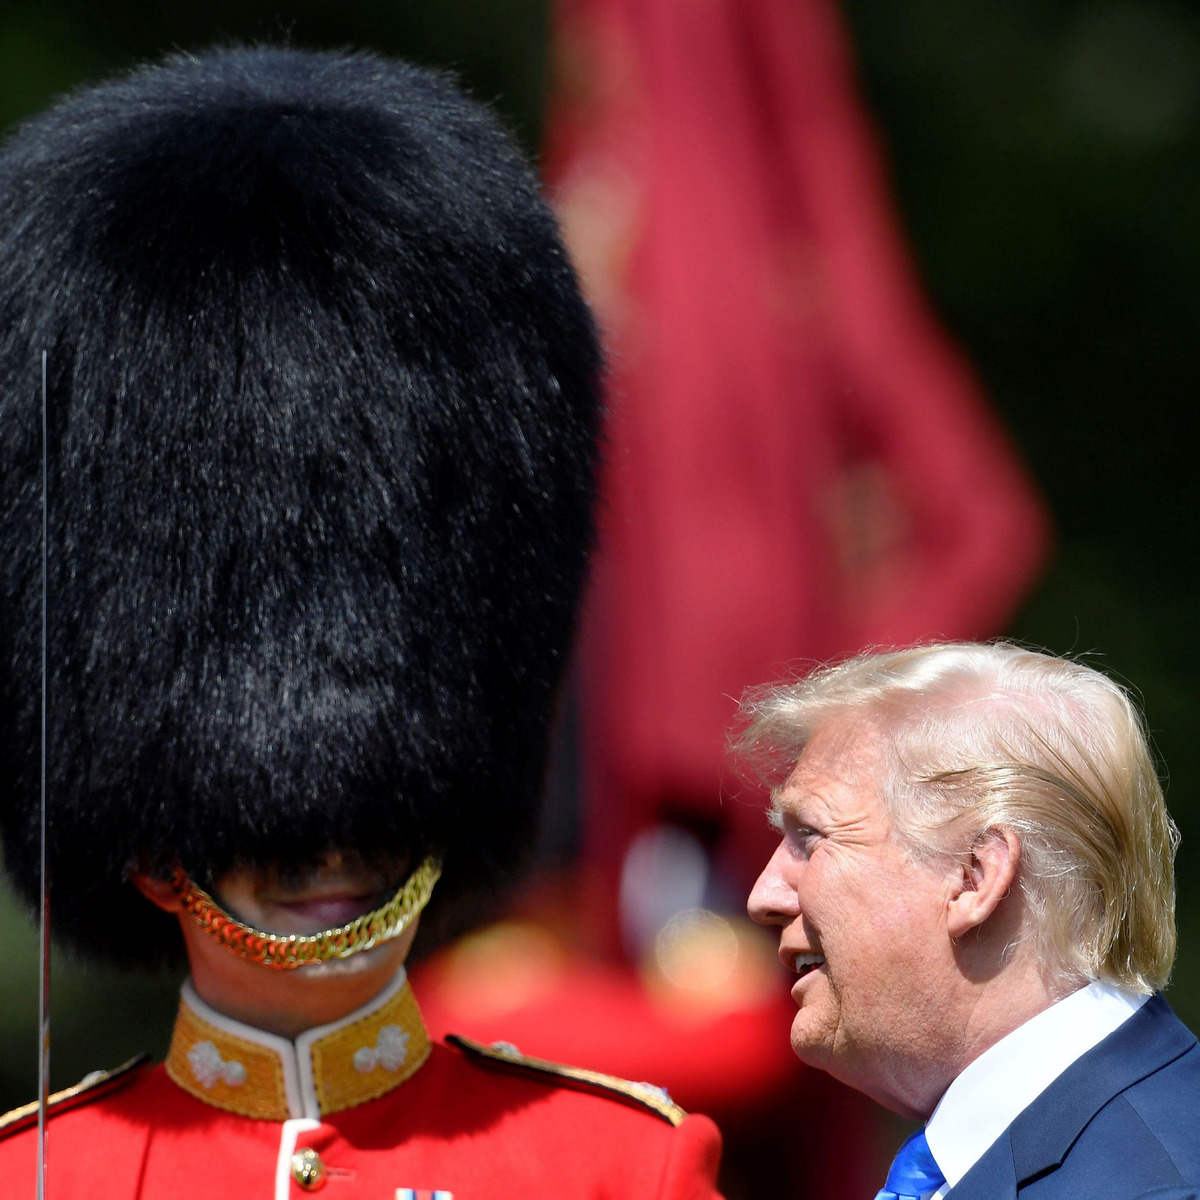 US President Donald Trump reviews an honor guard during a ceremonial welcome in the garden of Buckingham Palace on the opening day of a three day state visit to Britain, London, June 3, 2019.